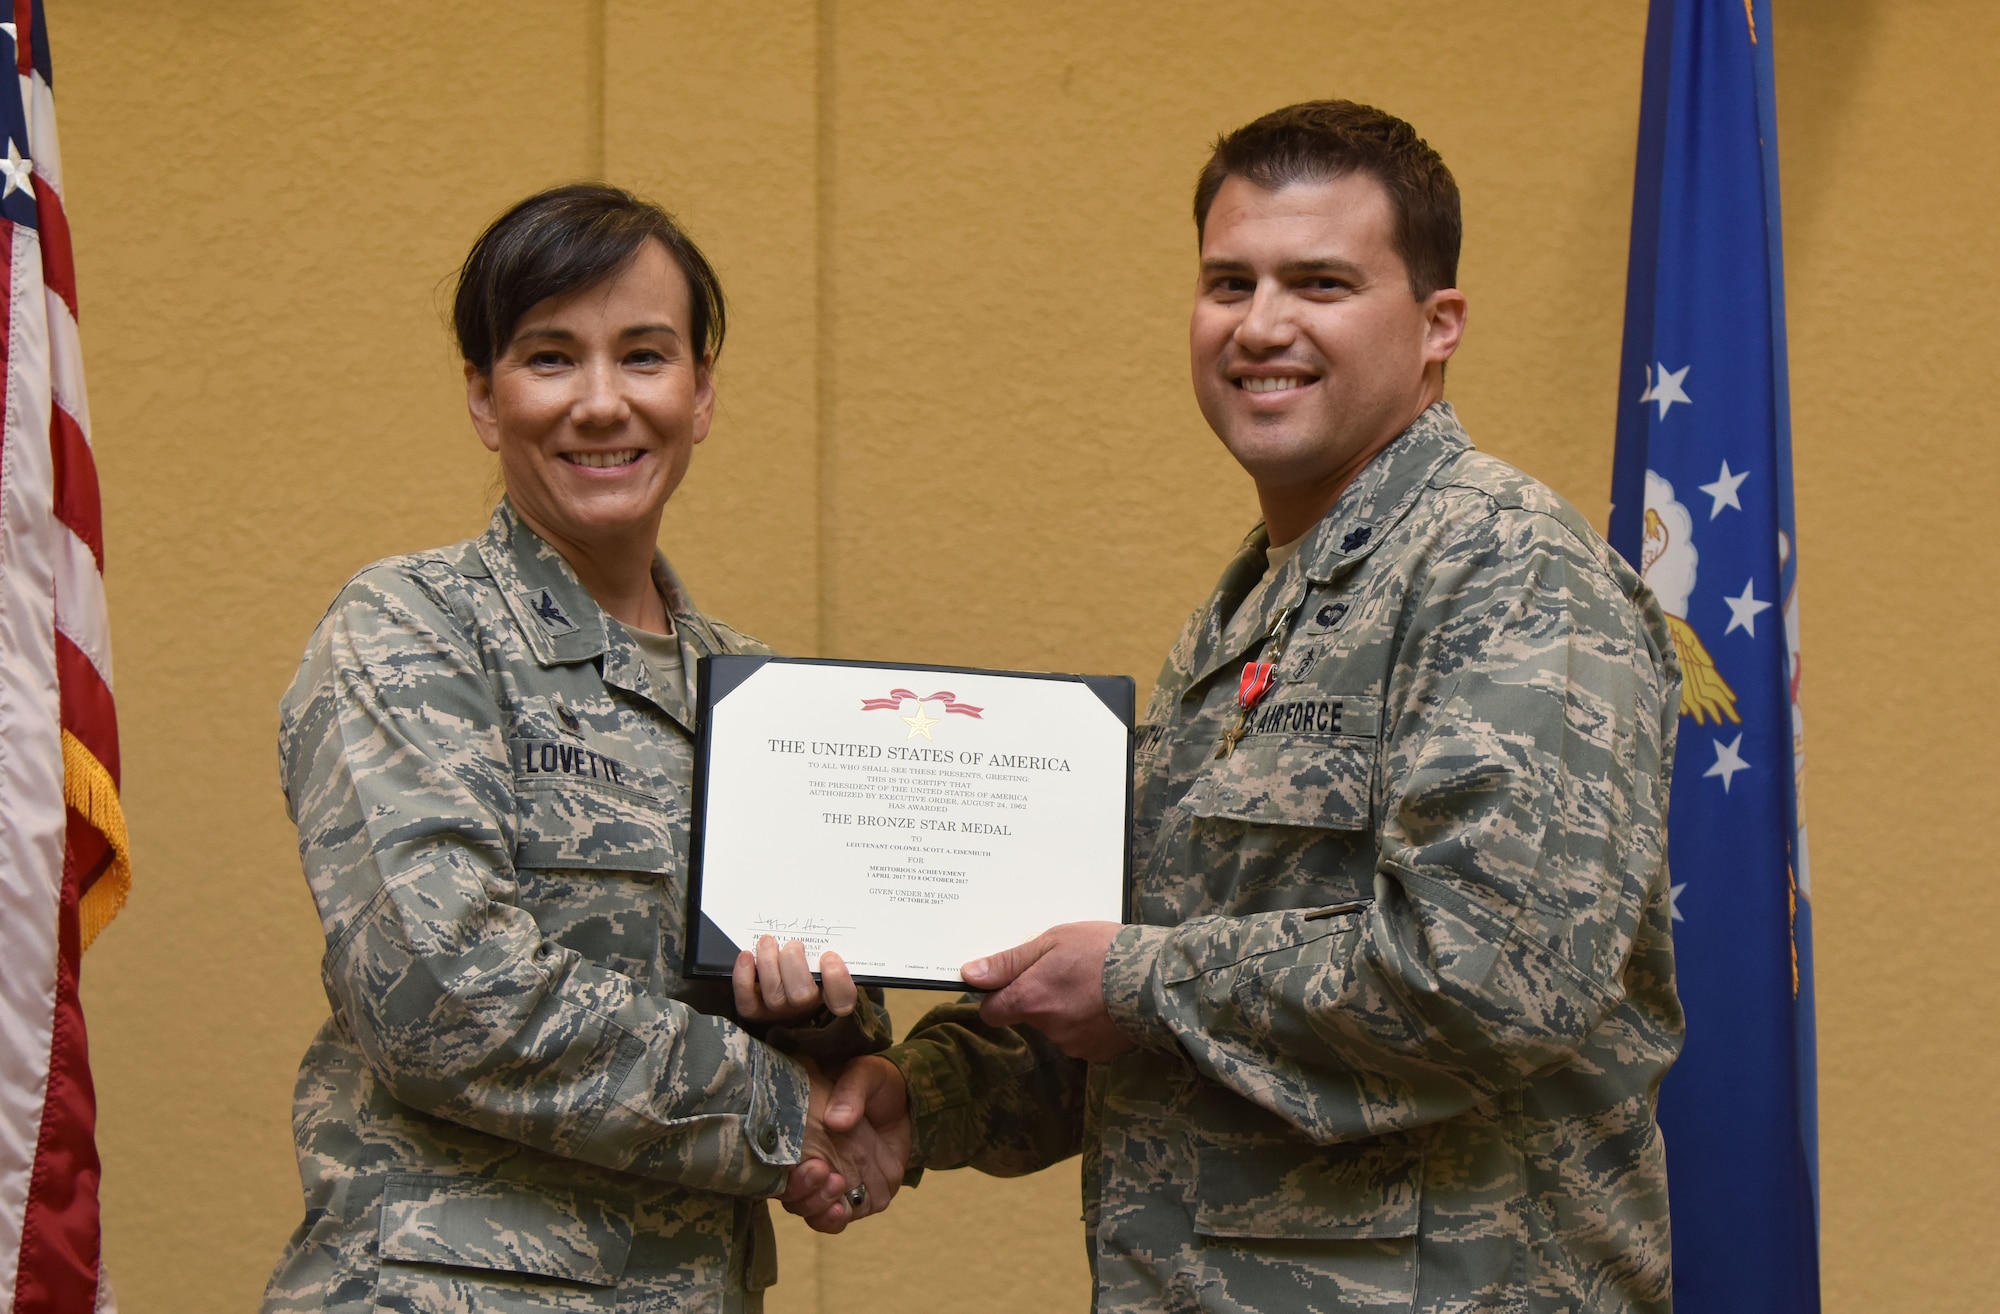 Col. Debra Lovette, 81st Training Wing commander, presents Lt. Col. Scott Eisenhuth, 81st Surgical Operations Squadron orthopedic surgeon, with a certificate of recognition during a commander’s all-call at the Bay Breeze Event Center March 5, 2018, on Keesler Air Force Base, Mississippi. Eisenhuth was presented with a Bronze Star for meritorious achievement while assigned to a surgical team deployed to Iraq, April 2017, through Oct. 2017. (U.S. Air Force photo by Kemberly Groue)